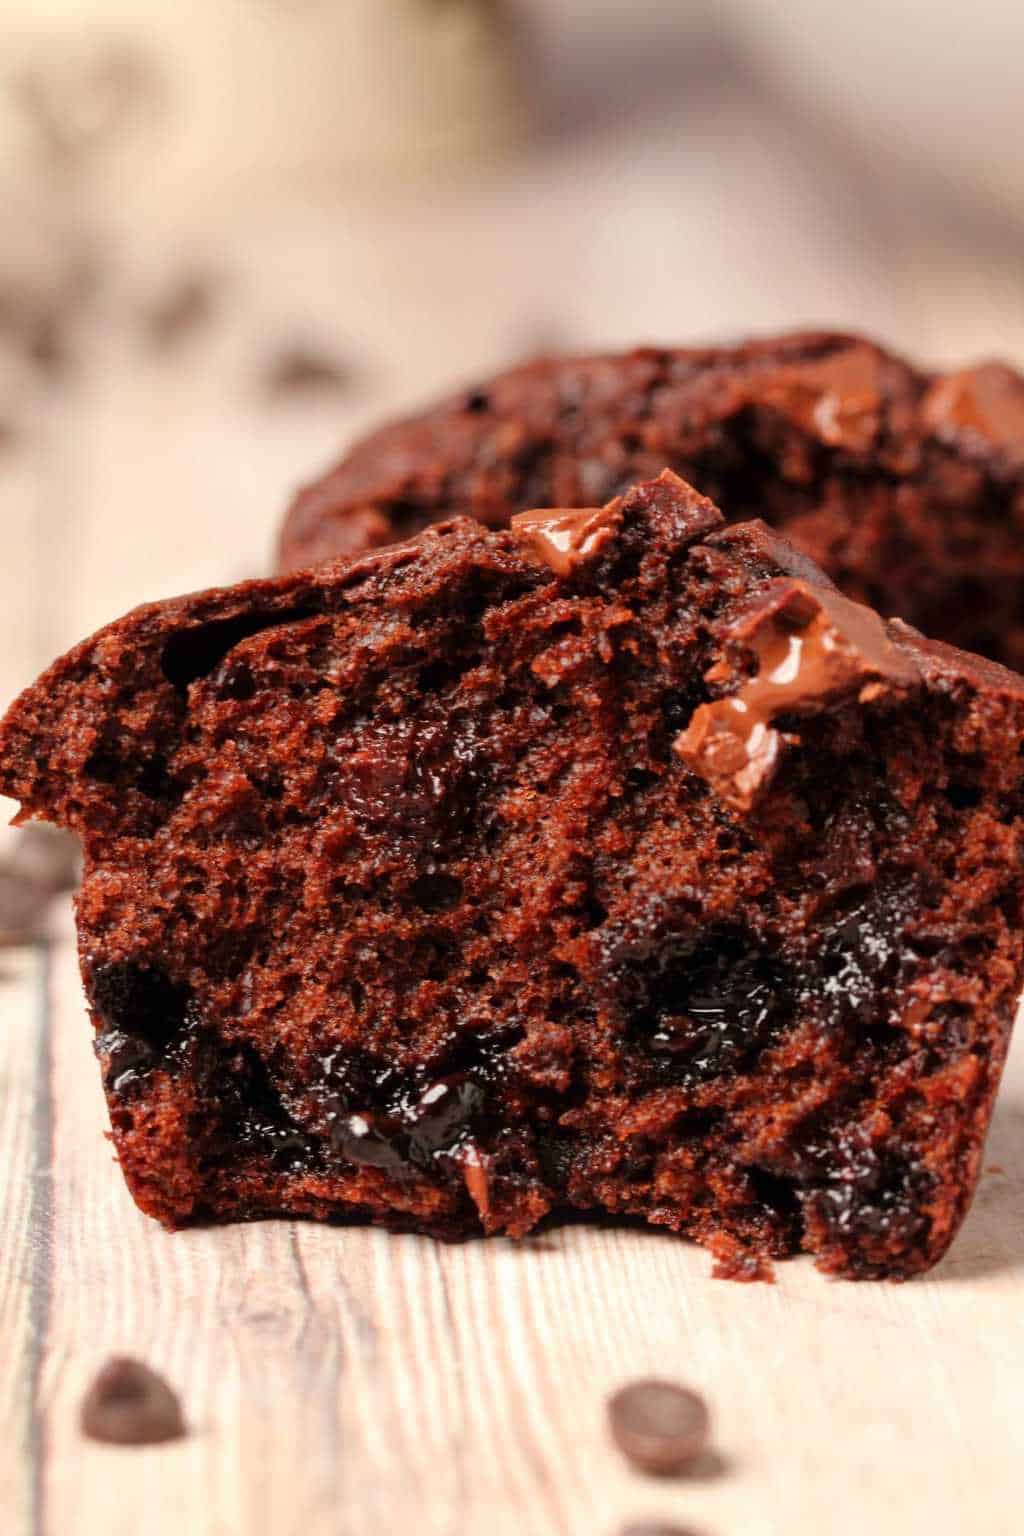 Chocolate muffin broken in half to show the center. 